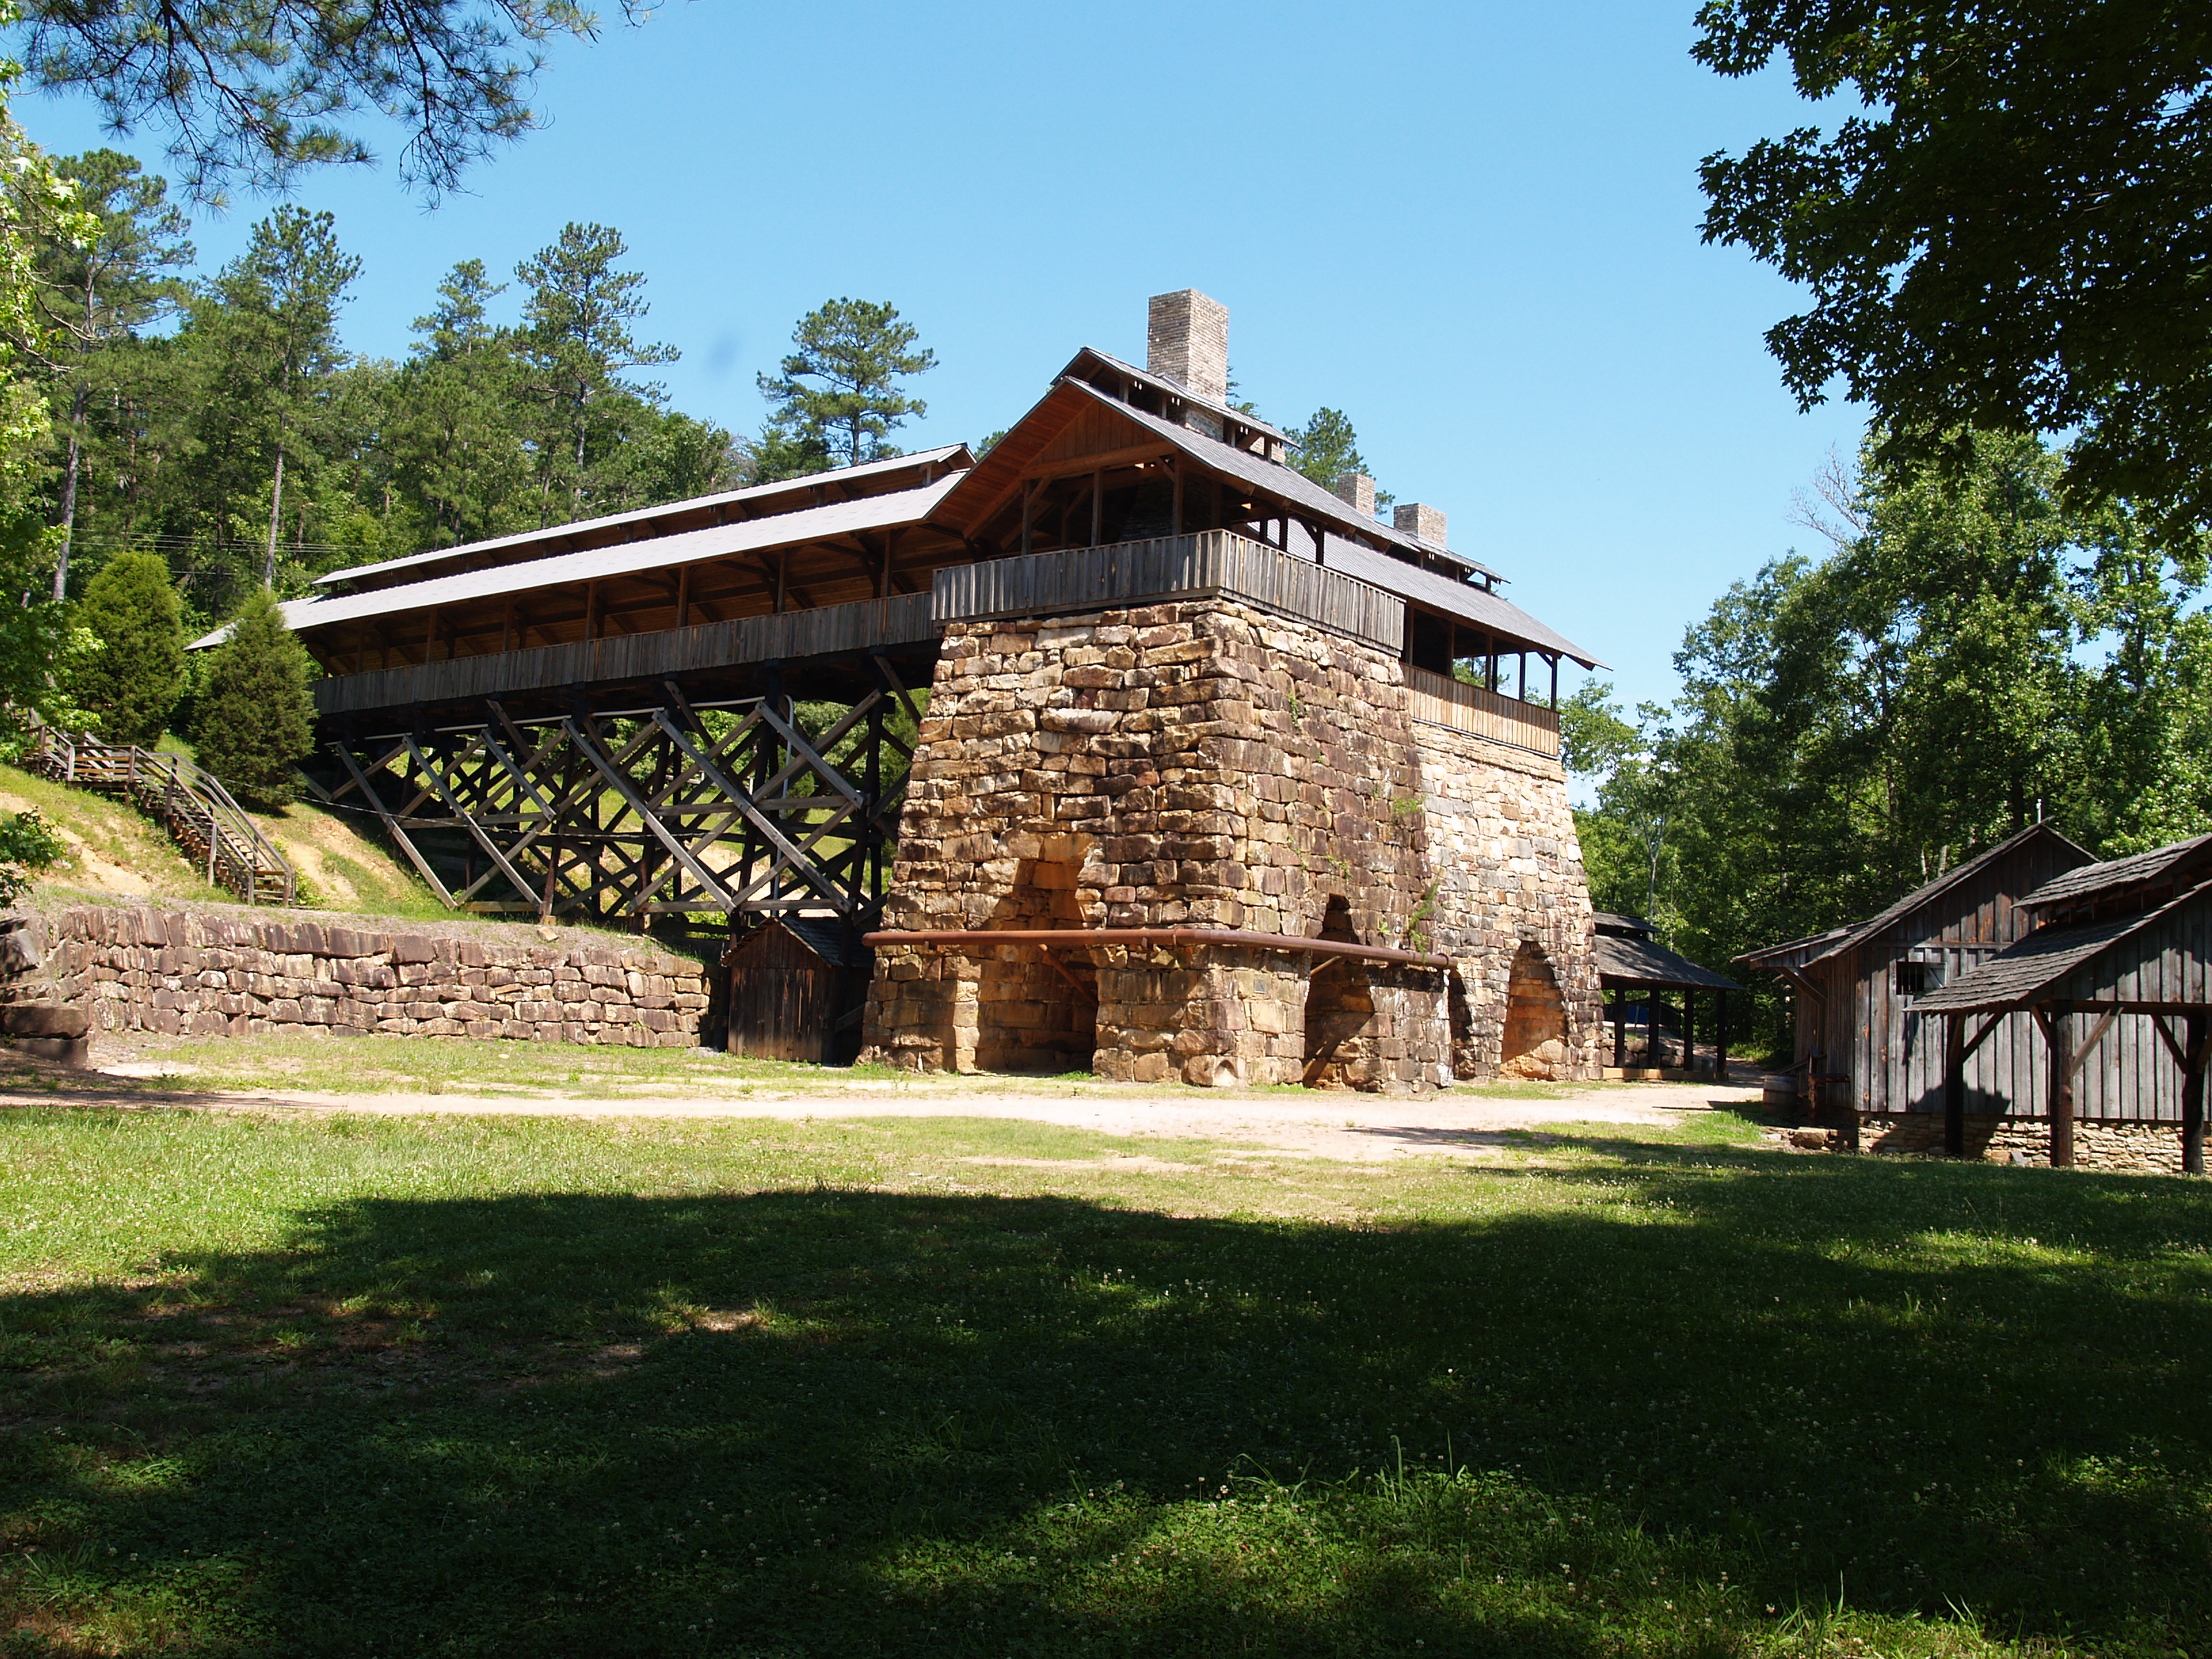 The Brierfield Ironworks Historical State Park is a beautiful setting